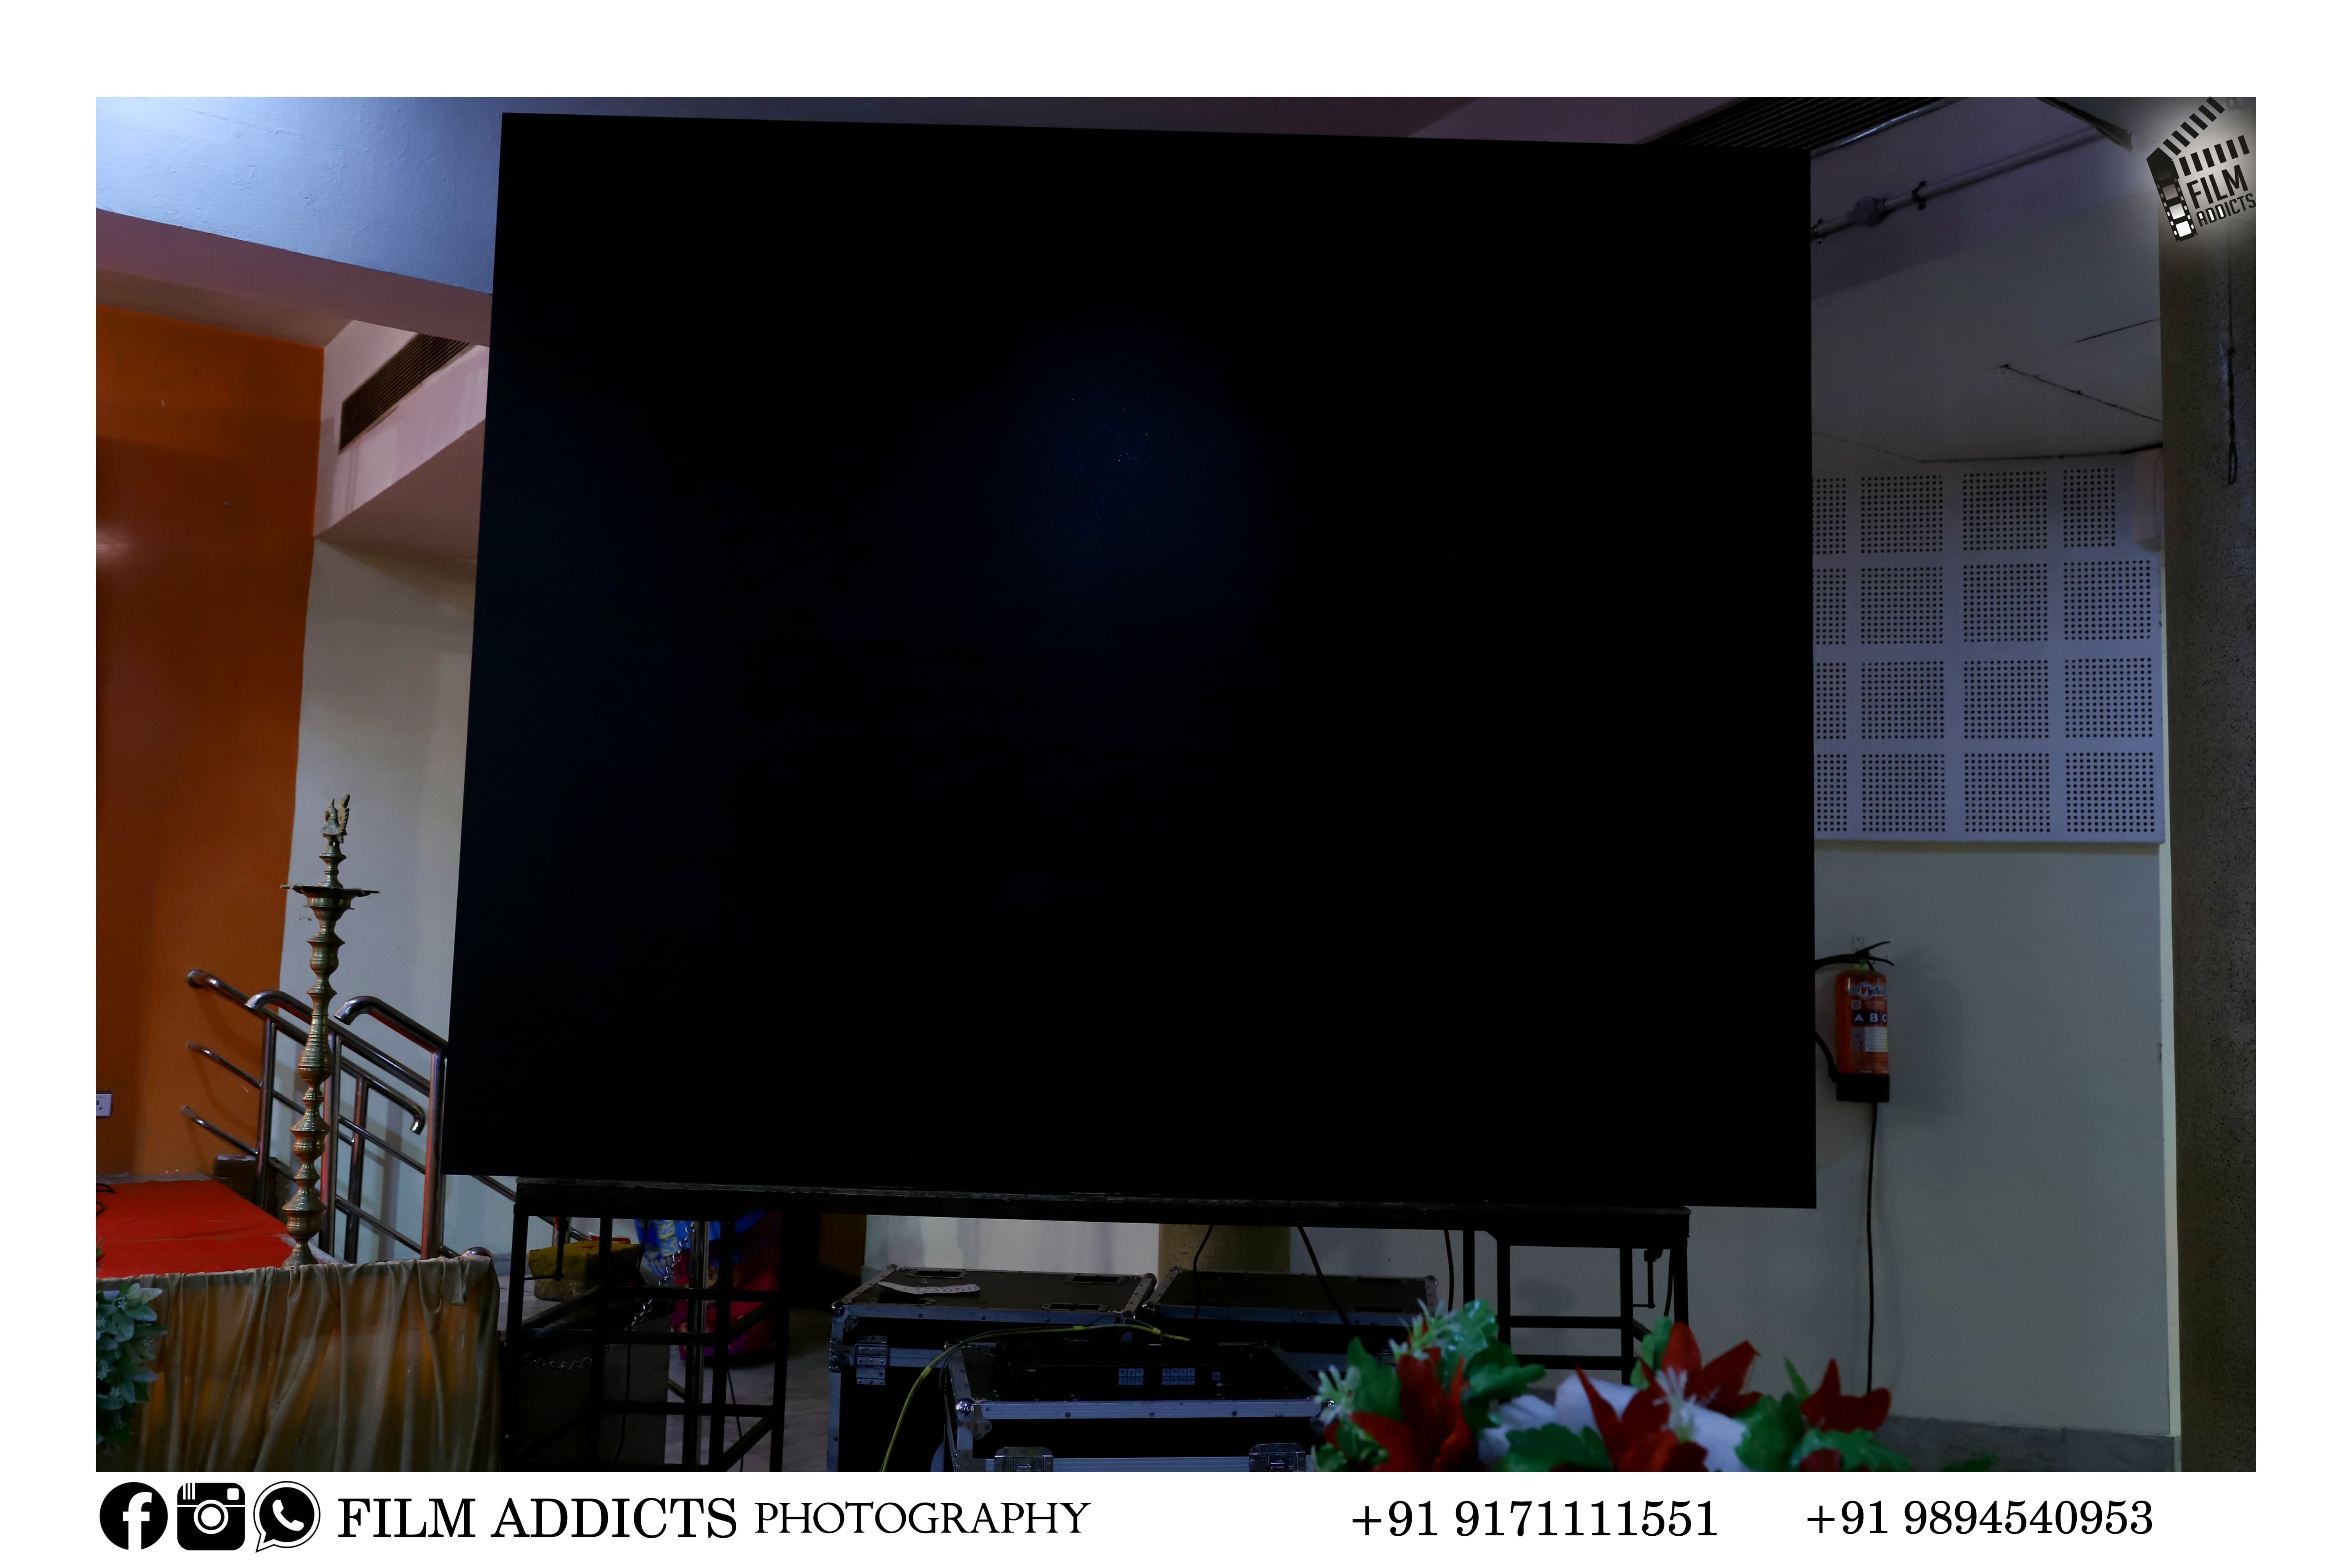 Led wall in Dindigul, Led wall rental in Dindigul, Led wall display in Dindigul, Led wall wedding in Dindigul, Led wall for wedding reception, Led wall event in Dindigul, Led wall event management in Dindigul, Led video wall for events in Dindigul, led video wall rental in Dindigul, wedding led video wall rental & hiring Dindigul, marriage led video wall rental & hiring in Dindigul, wedding led screen rental Dindigul, marriage led screen Dindigul, indoor & outdoor led video wall in Dindigul, led wall in marriage, led wall rental in Dindigul, led rental, led video wall hiring Dindigul, marriage led screen, wedding led screen rental,live streaming in Dindigul, live streaming, live tv, live streaming wedding, wedding live streaming Dindigul, marriage live streaming Dindigul, live streaming services in Dindigul, live streaming wedding Dindigul.